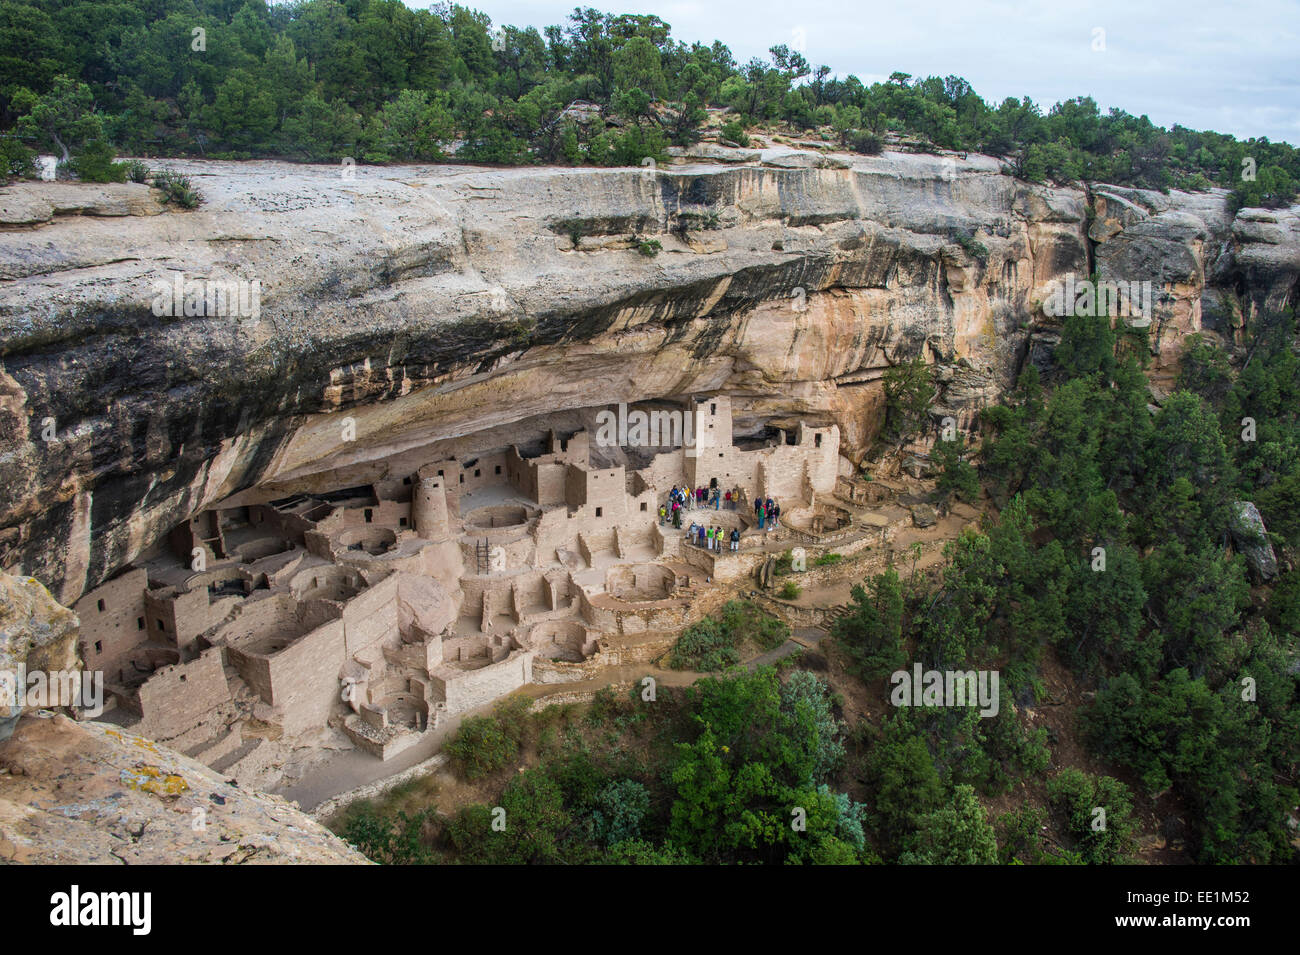 The Cliff Palace Indian dwelling, Mesa Verde National Park, UNESCO World Heritage Site, Colorado, United States of America Stock Photo